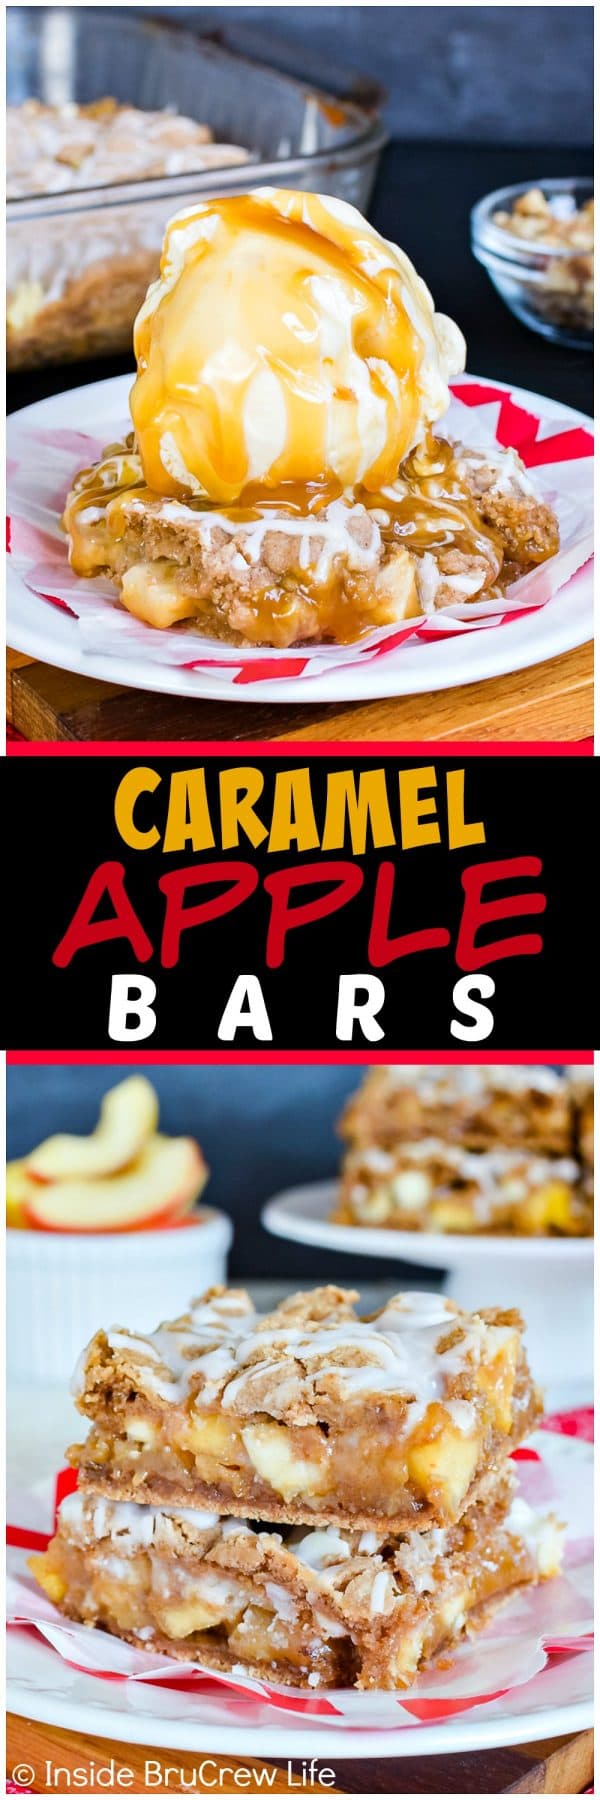 Caramel Apple Bars - this gooey bar recipe is loaded with fruit, nuts, and caramel. Add vanilla ice cream to make an awesome fall dessert! #apple #caramel #dessert #fall #easy #recipe #applebars